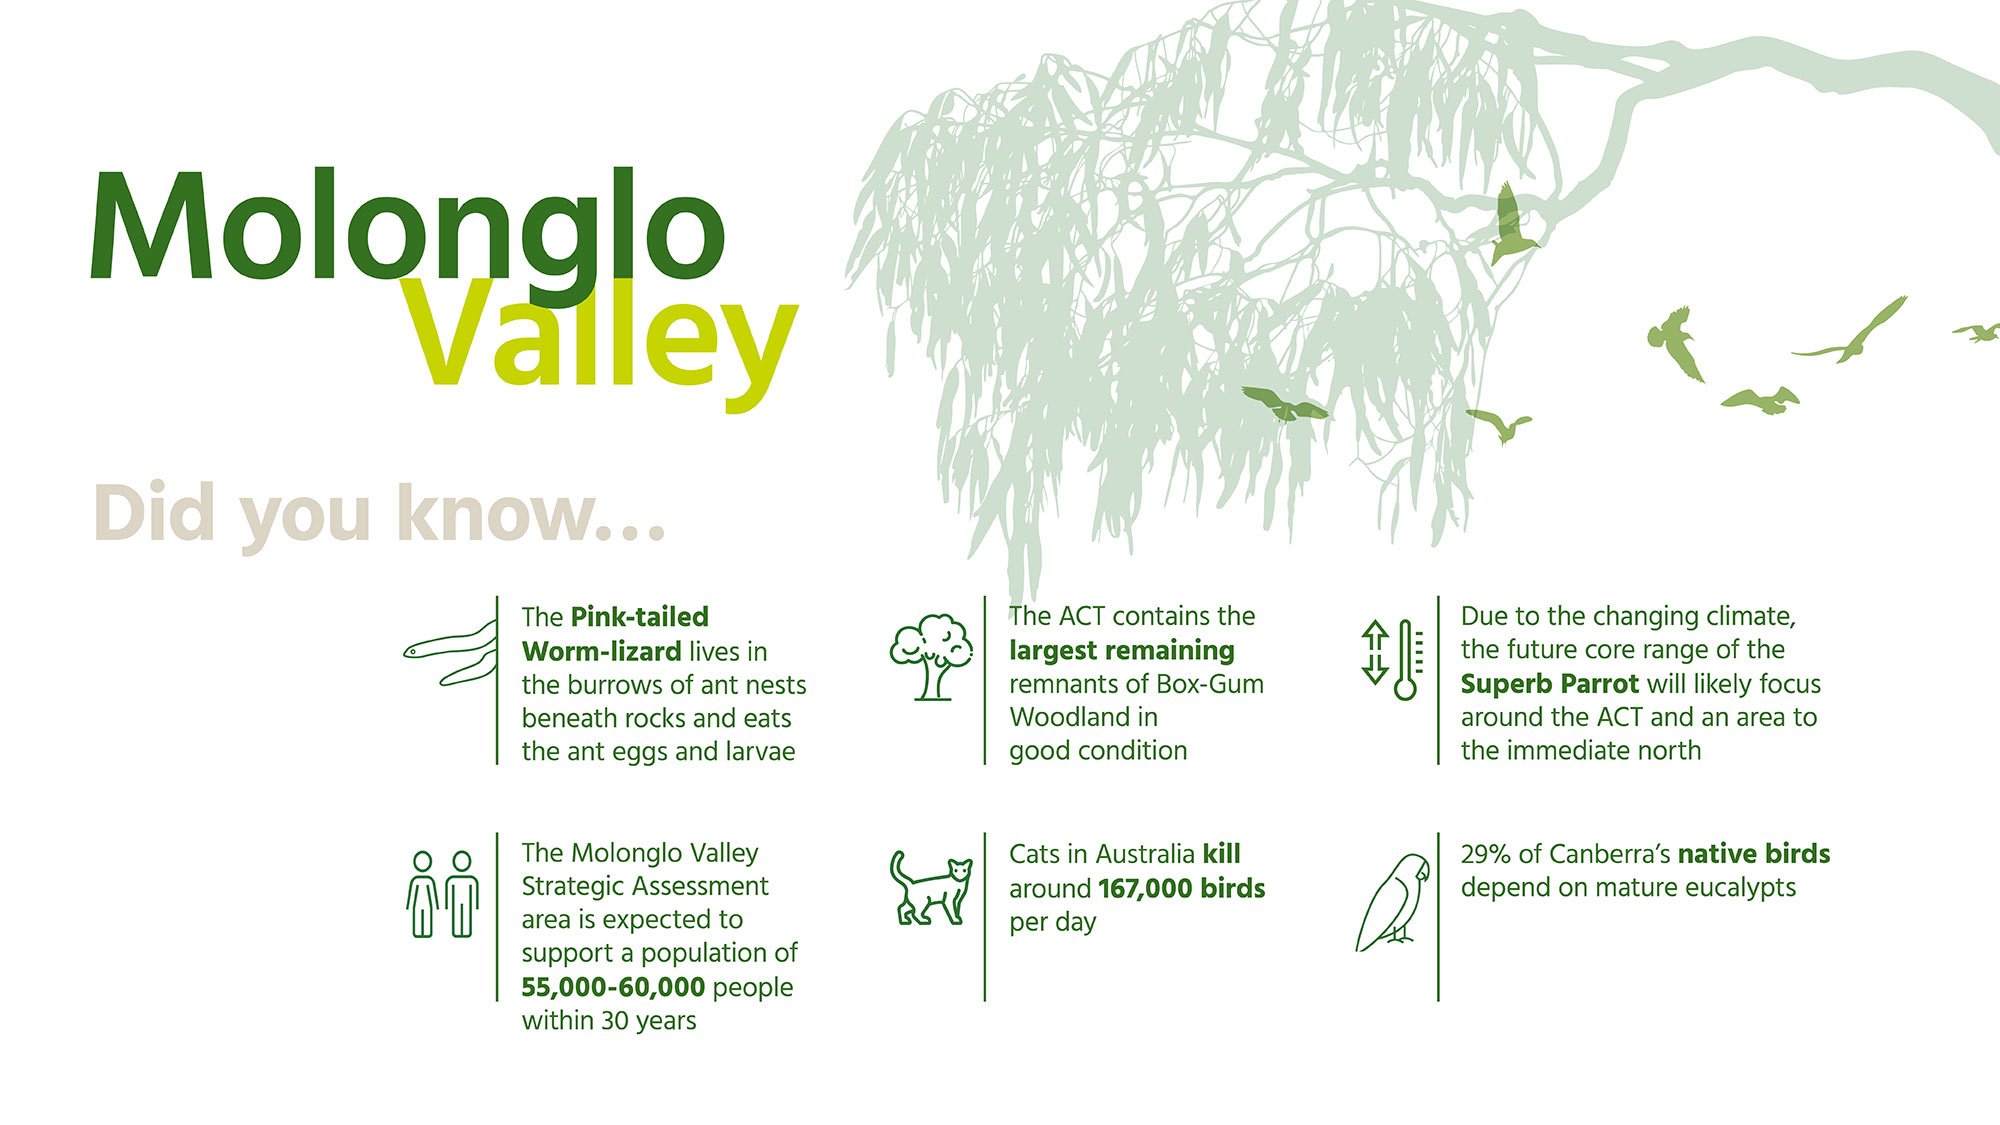 Did you know? Molonglo Valley